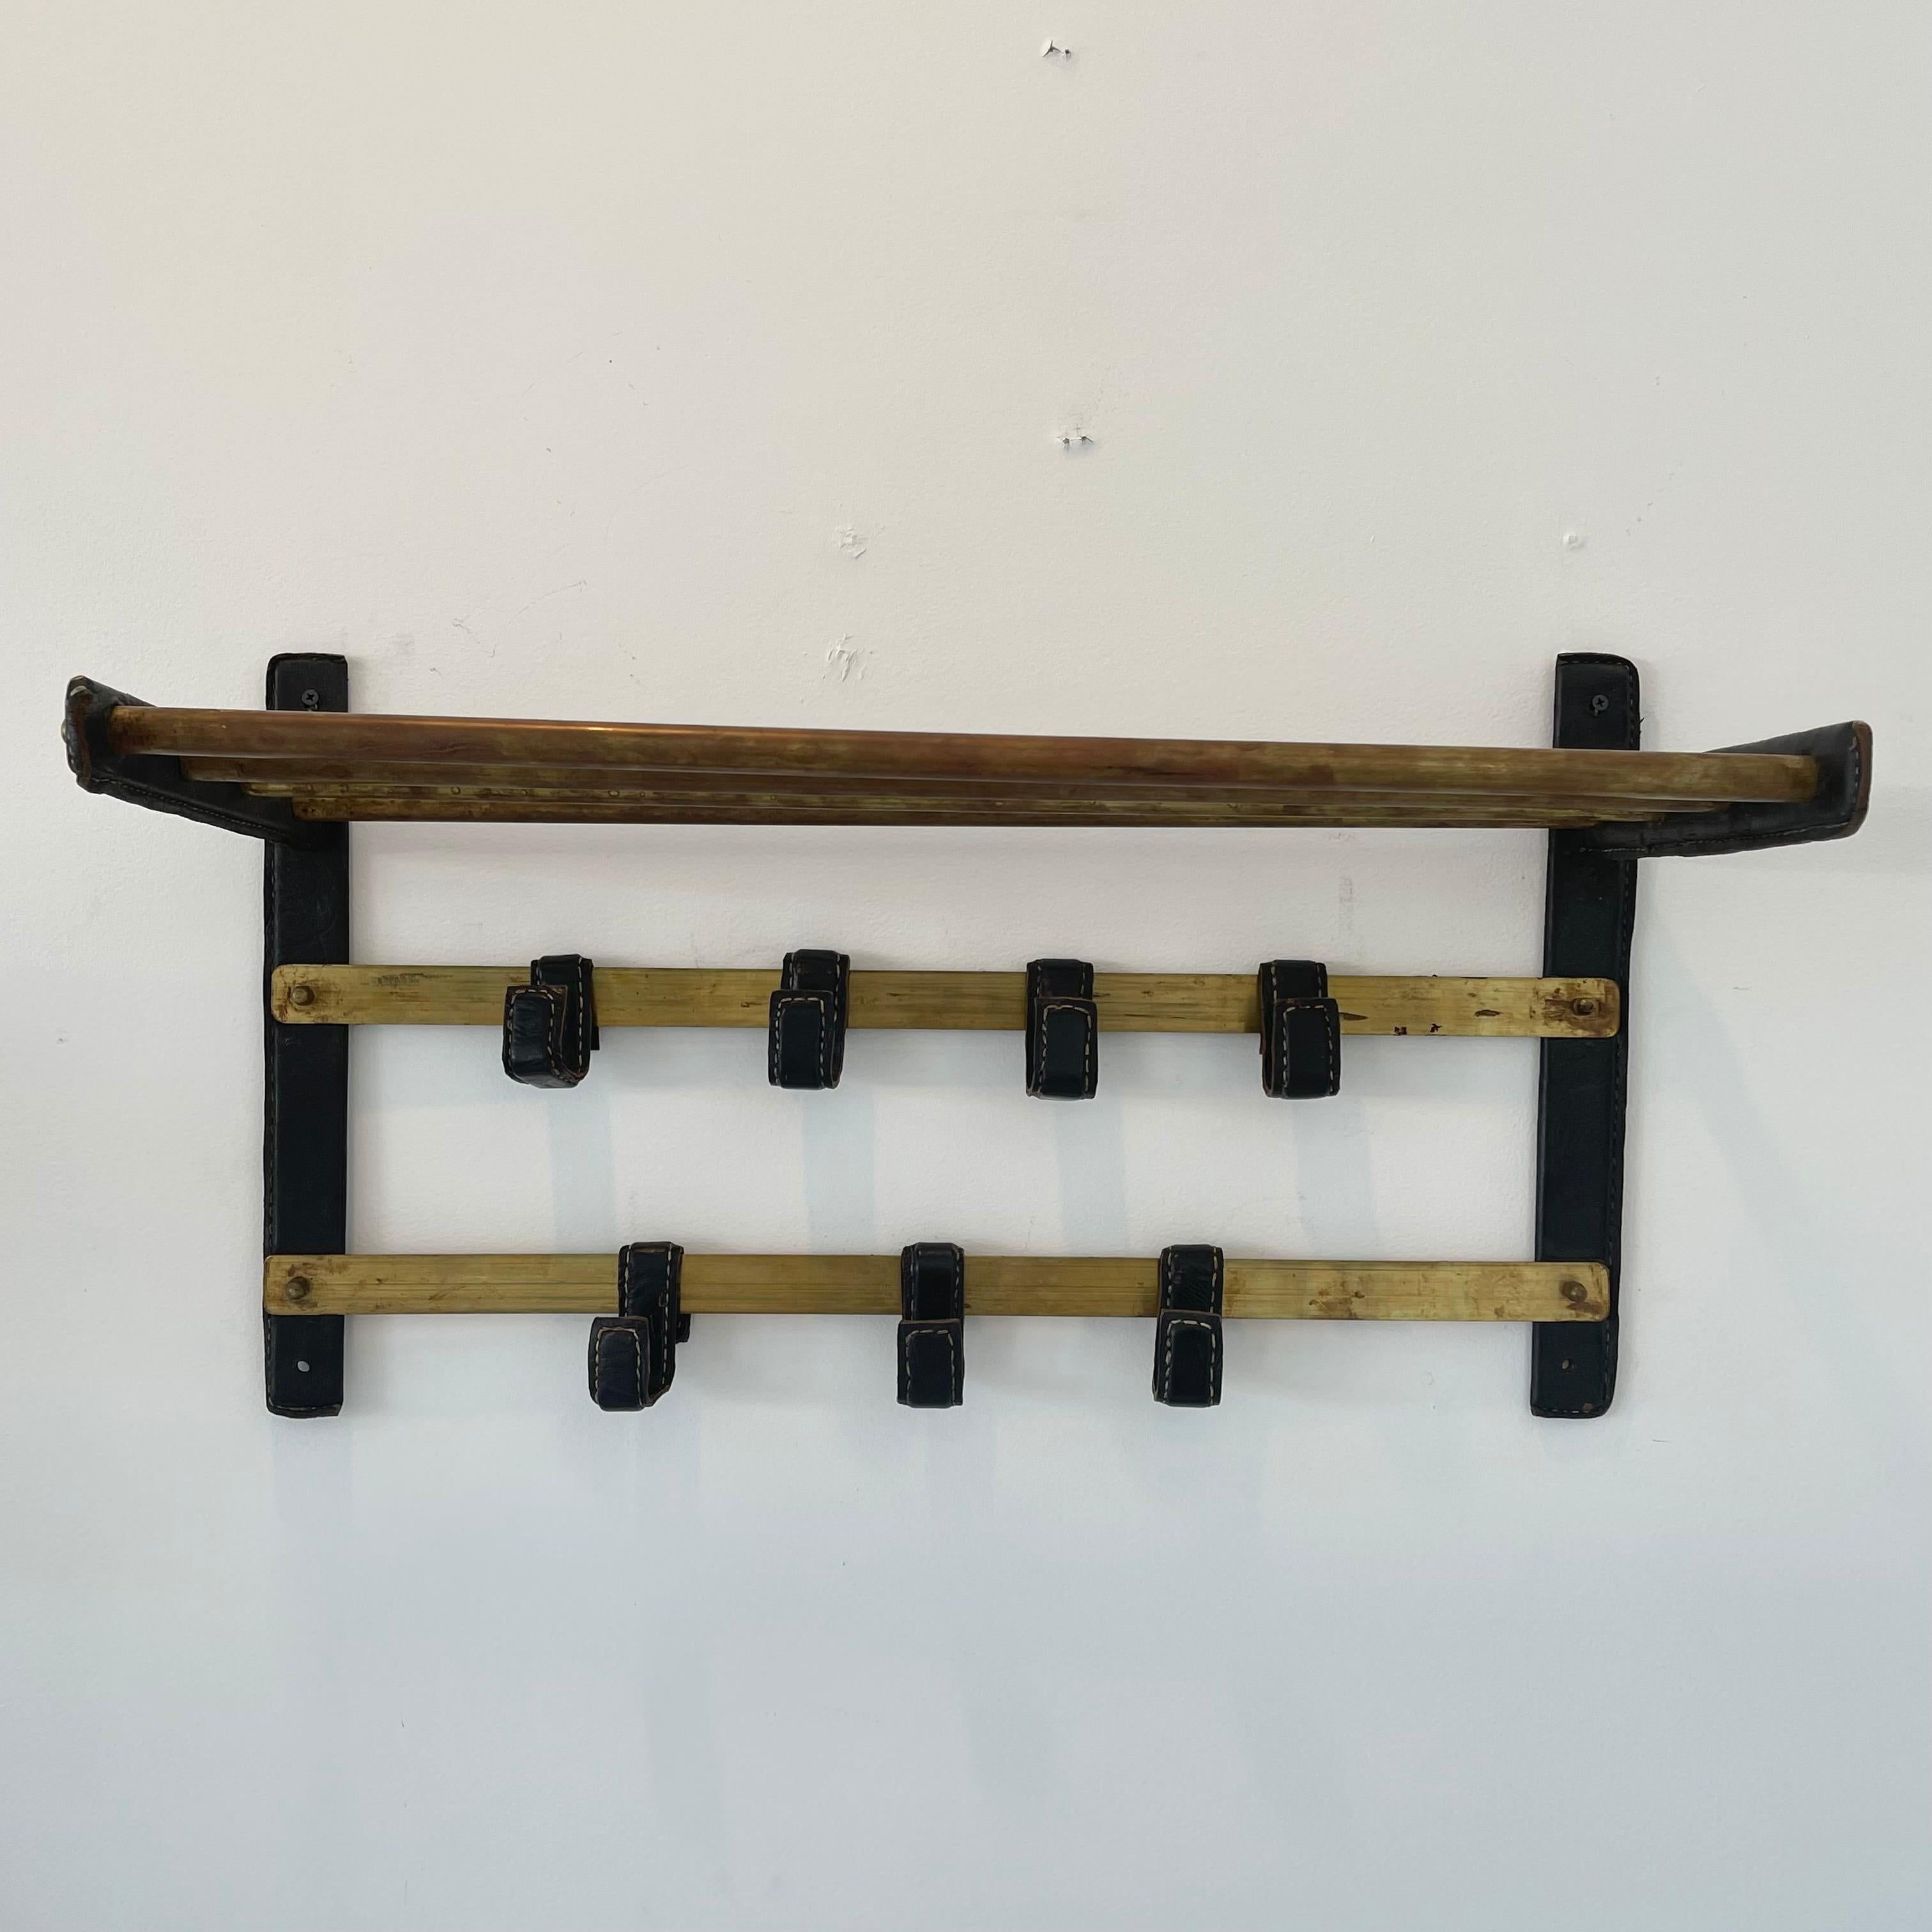 Stunning Jacques Adnet leather and brass wall rack with 7 moveable leather hooks. Right and left wall brackets wrapped in leather. Horizontal brackets also wrapped in leather. 4 heavy duty brass cross bars create a shelf on top. Extremely practical